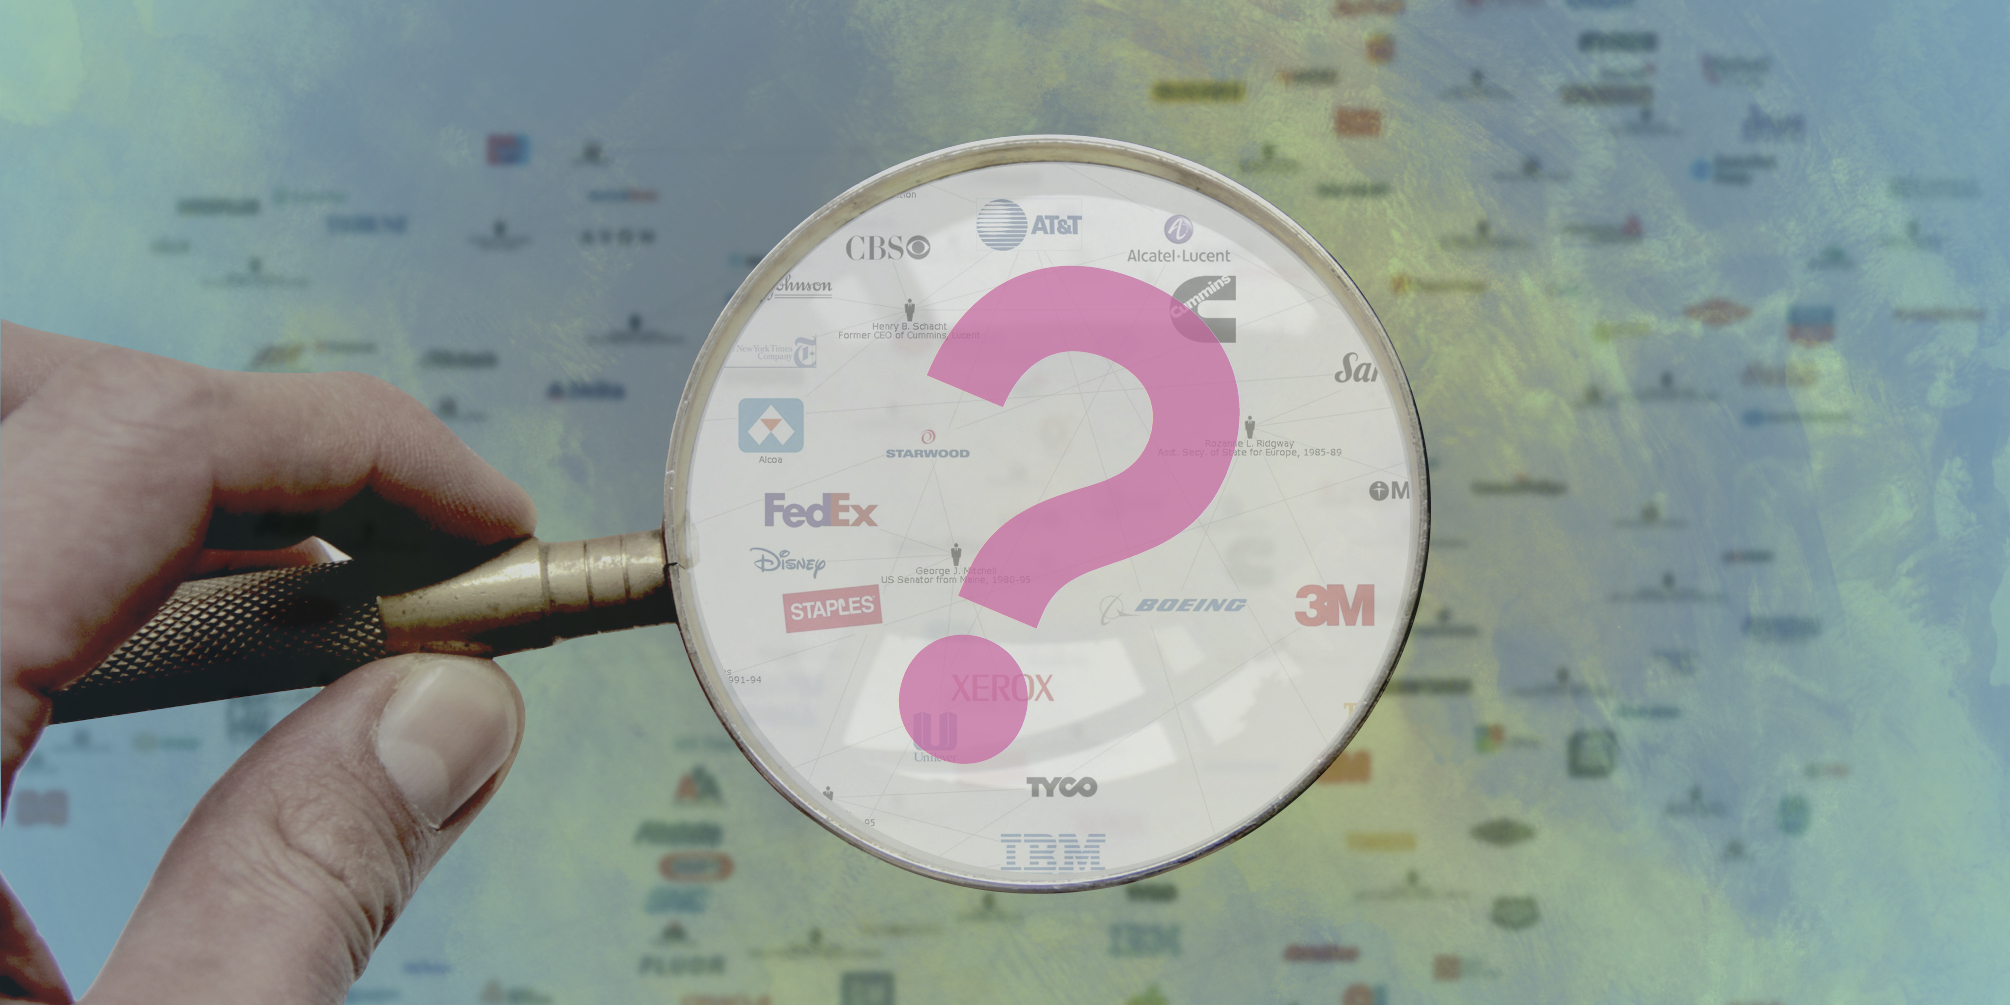 Magnifying glass over top of a map with company logos on it and a question mark